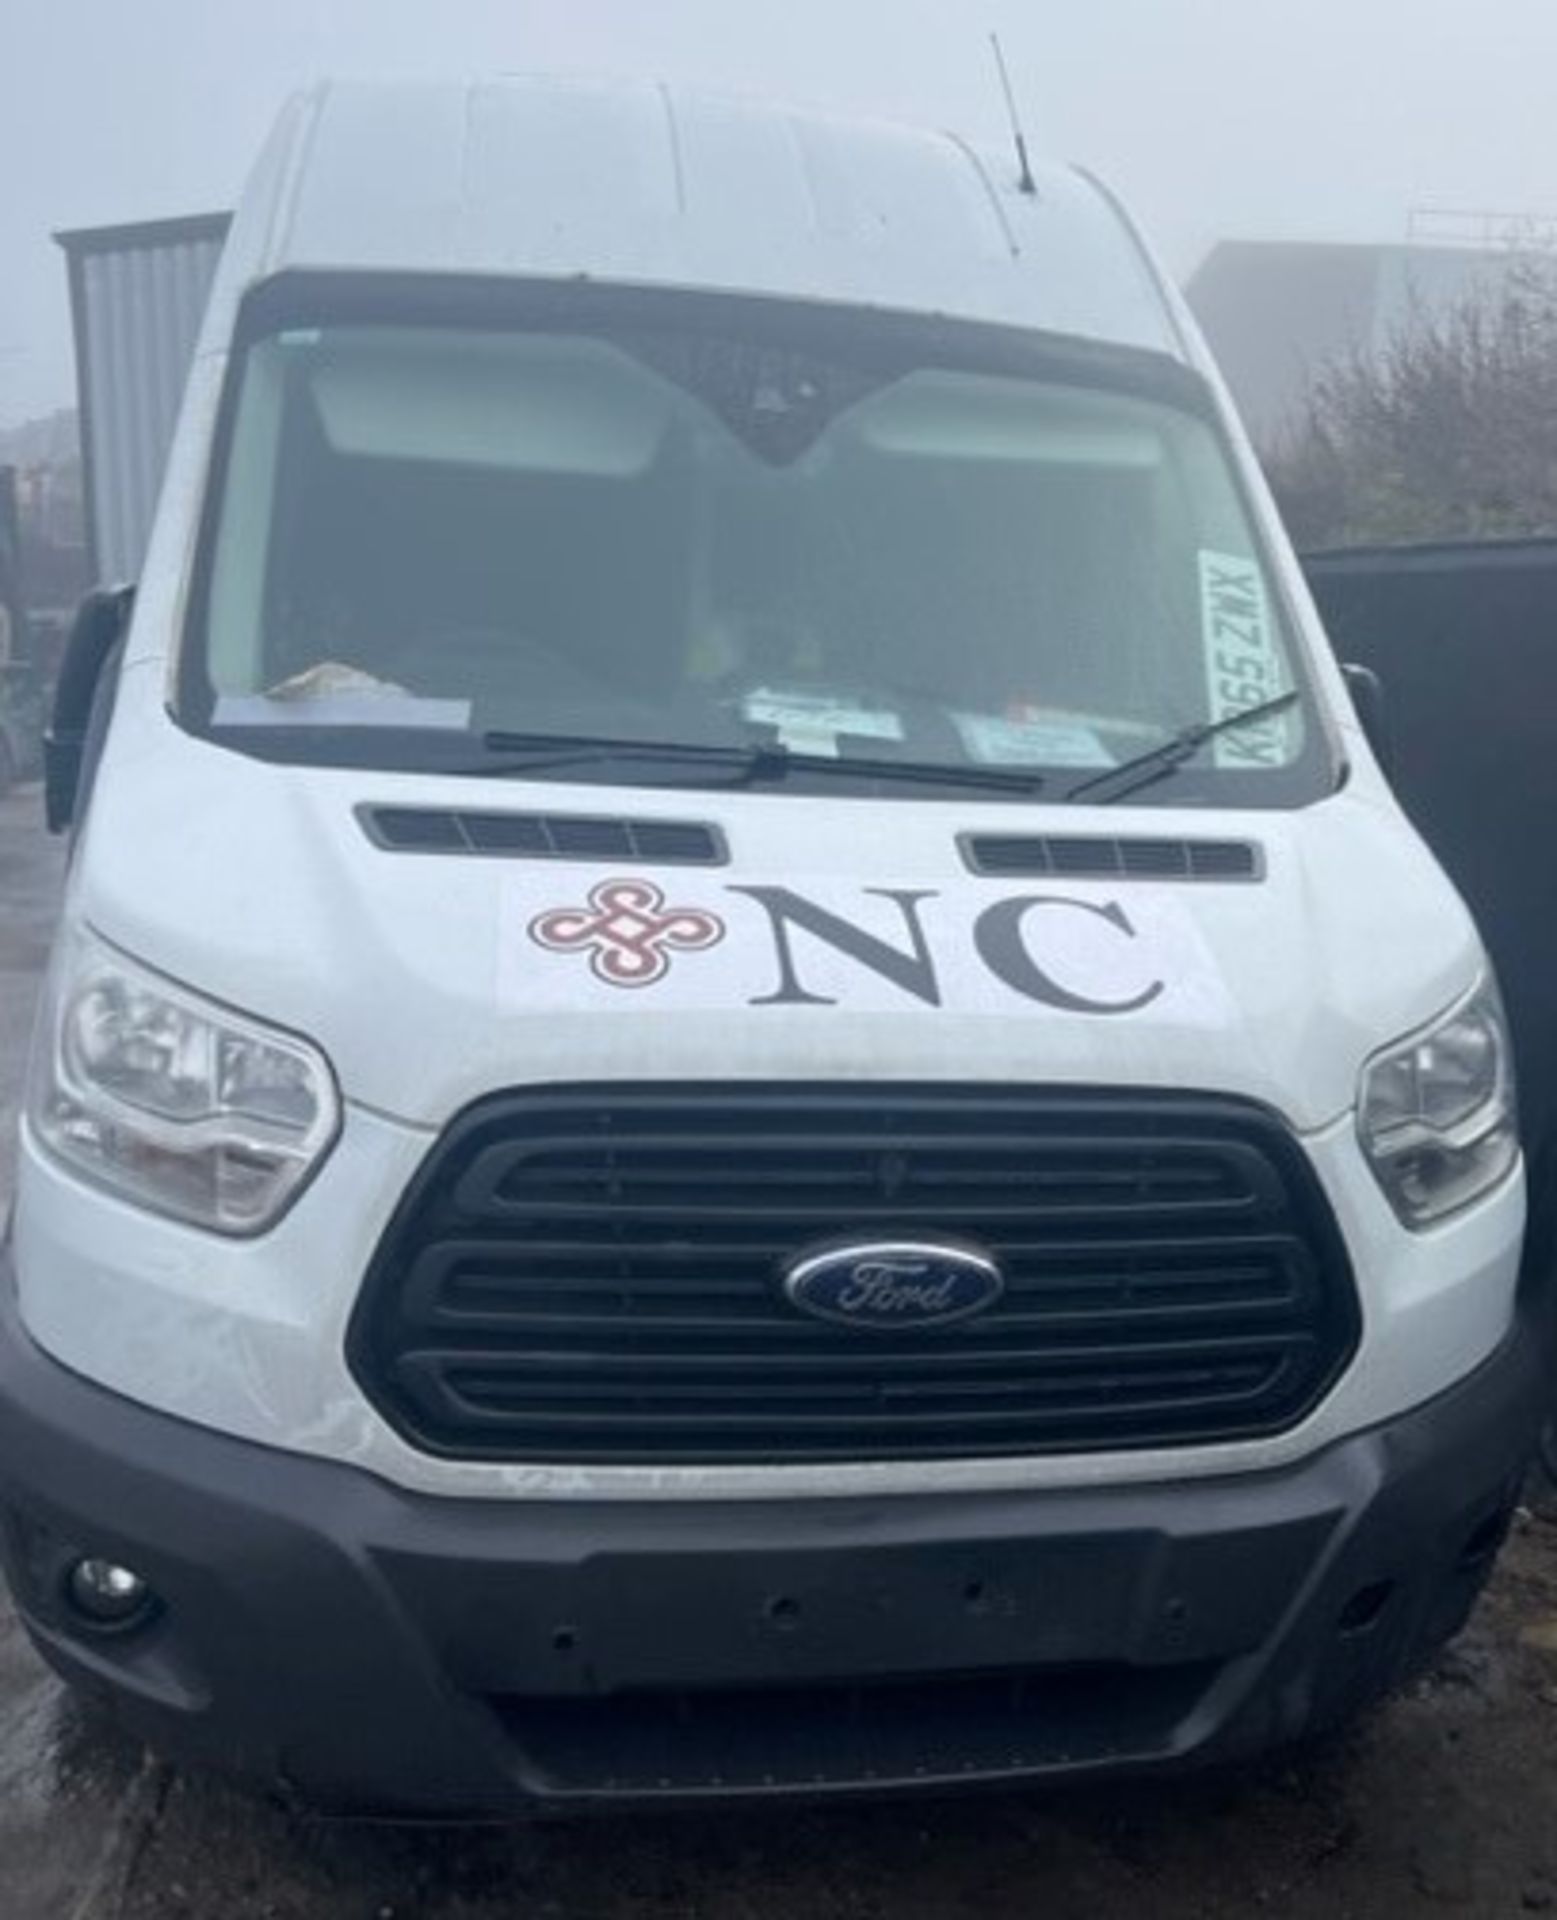 **** PLEASE NOTE THIS VEHICLE IS SITUATED IN CROYDON**** WHITE FORD TRANSIT 310 DIESEL PANEL VAN - Image 3 of 11